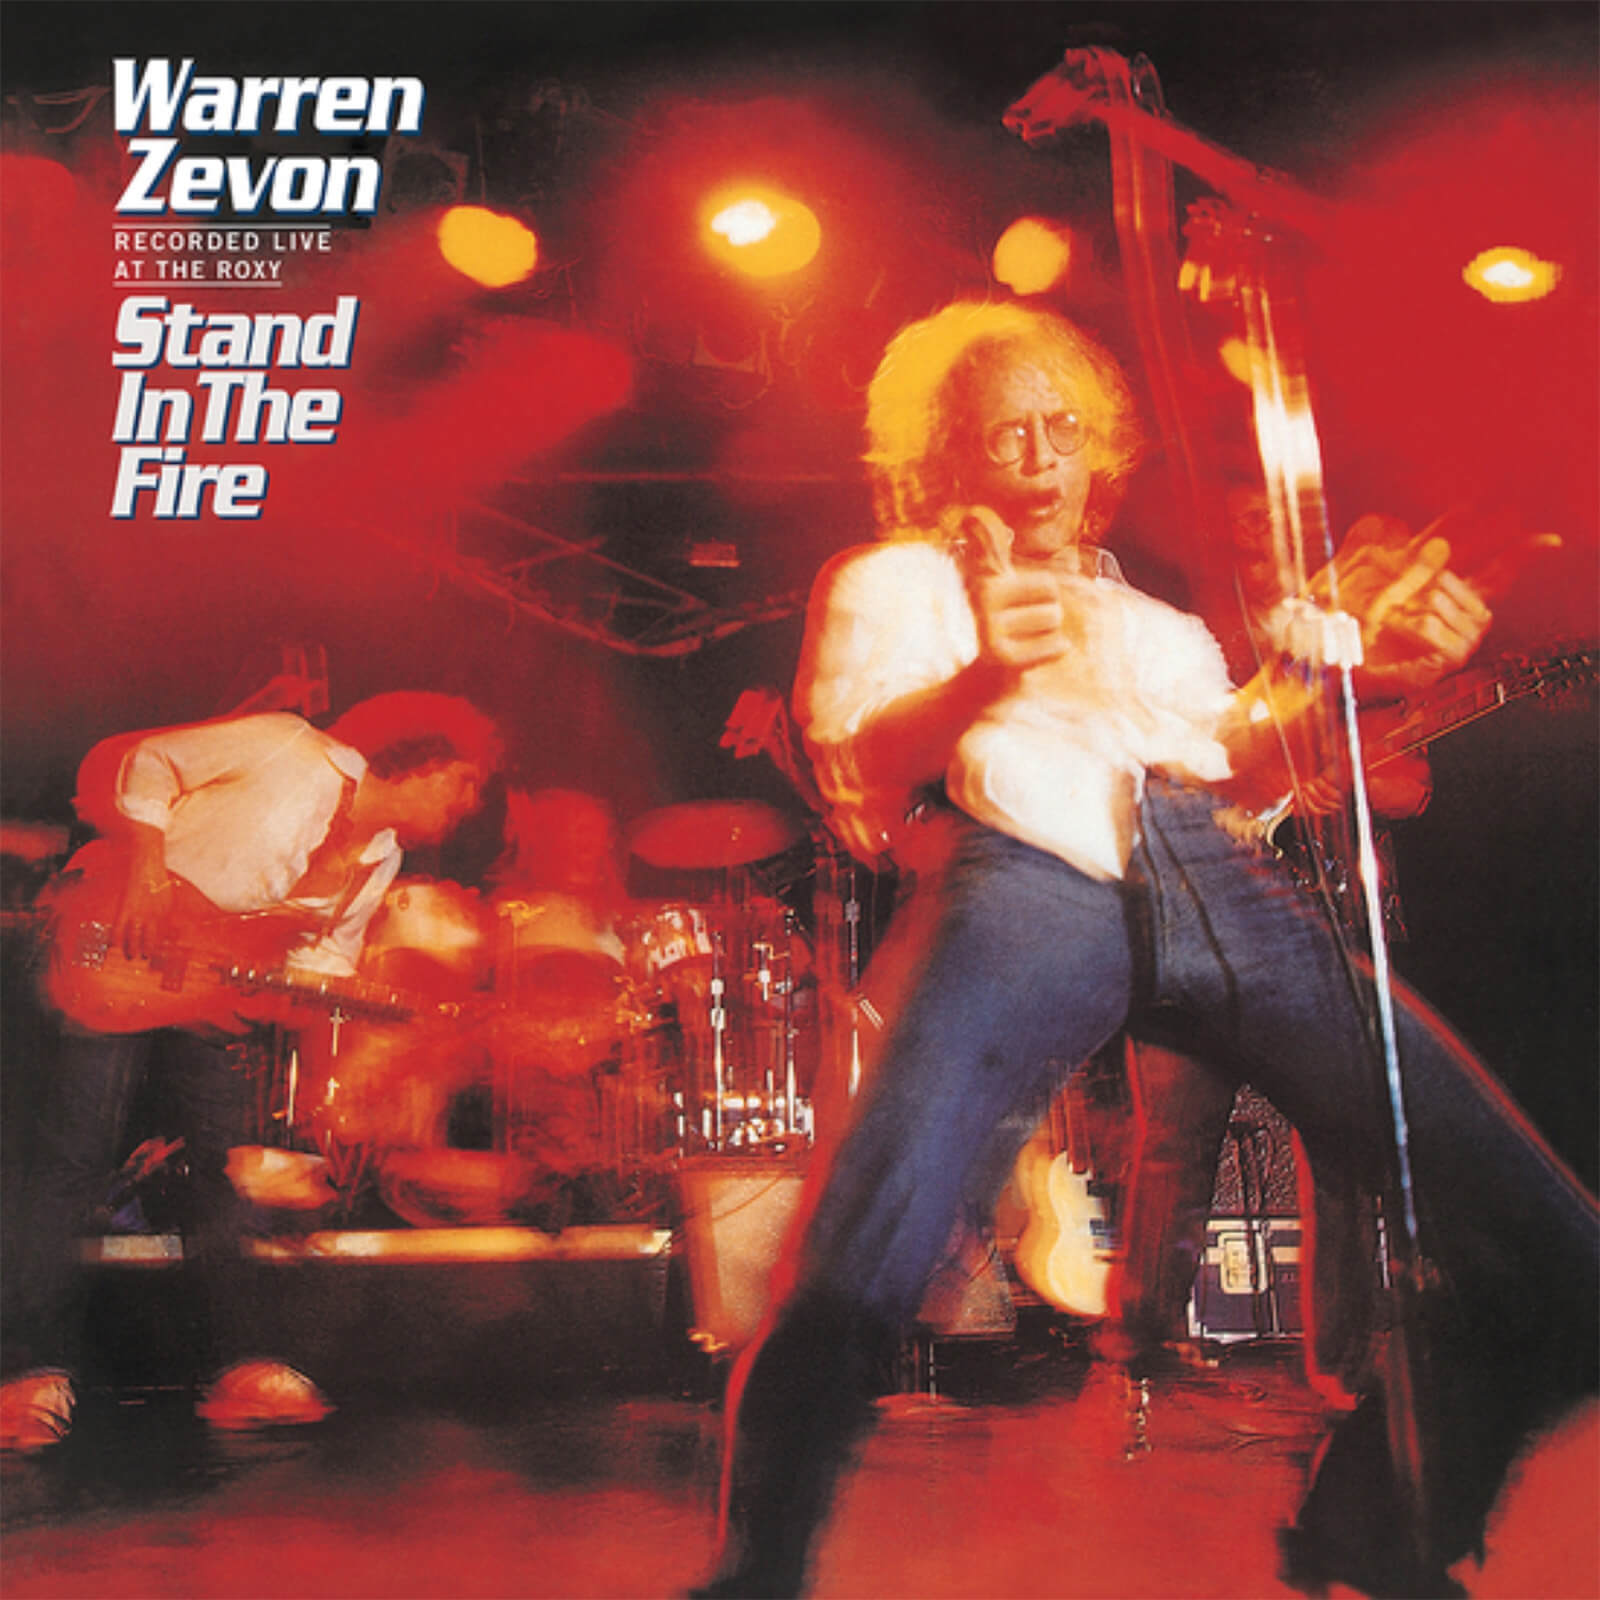 Run Out Groove Vinyl - Warren zevon - stand in the fire: recorded live at the roxy (deluxe edition) 3xlp